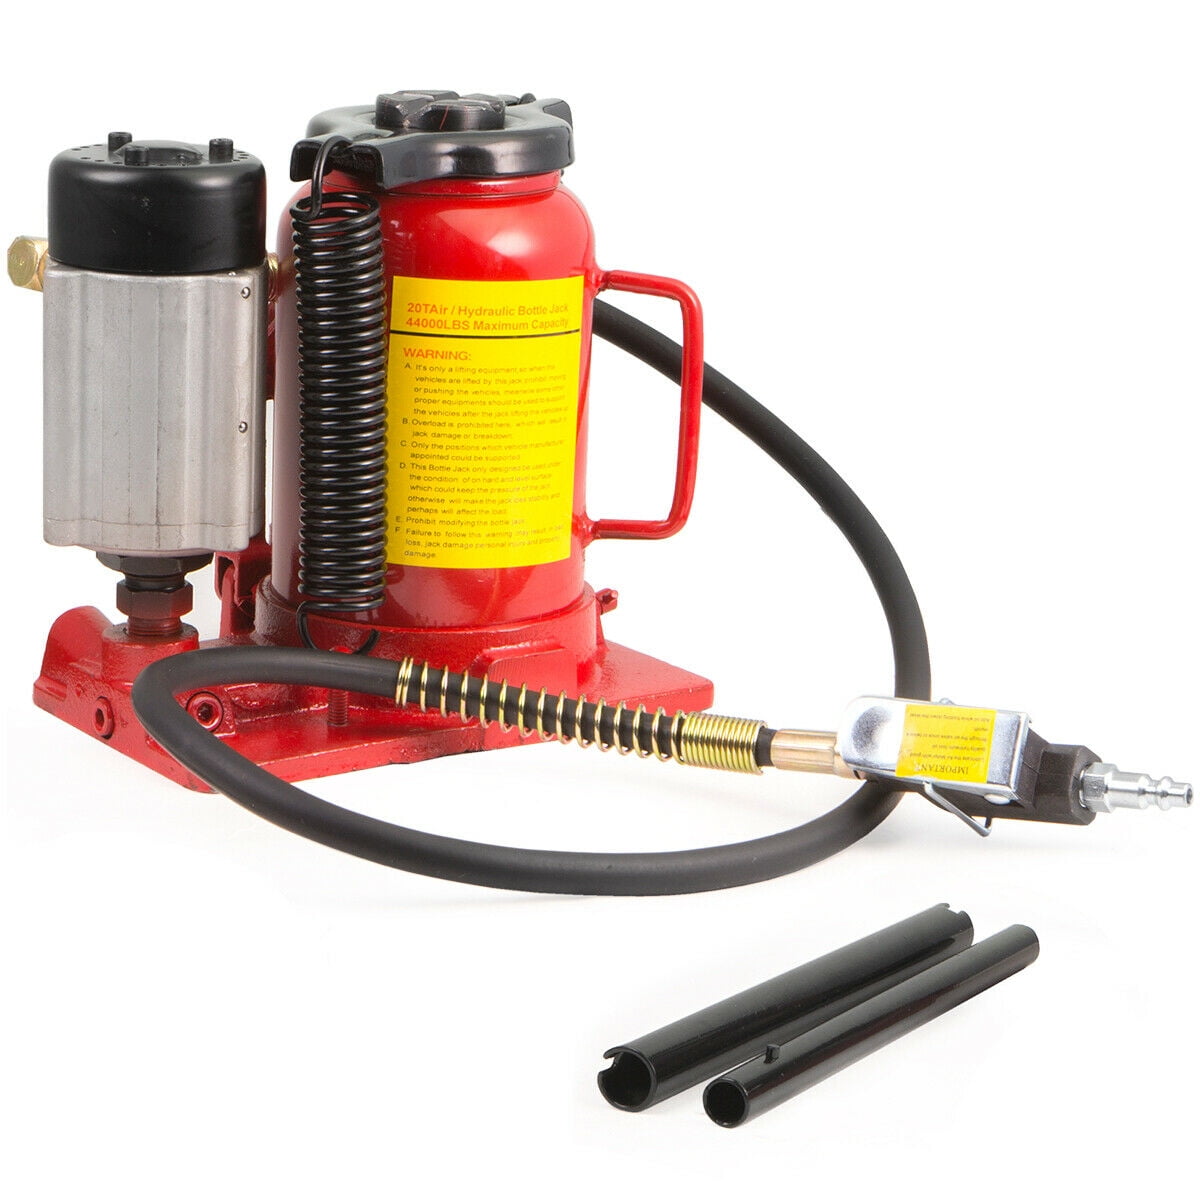 20Ton Portable Air Manual Power Over Hydraulic Low Profile Bottle Jack Lift